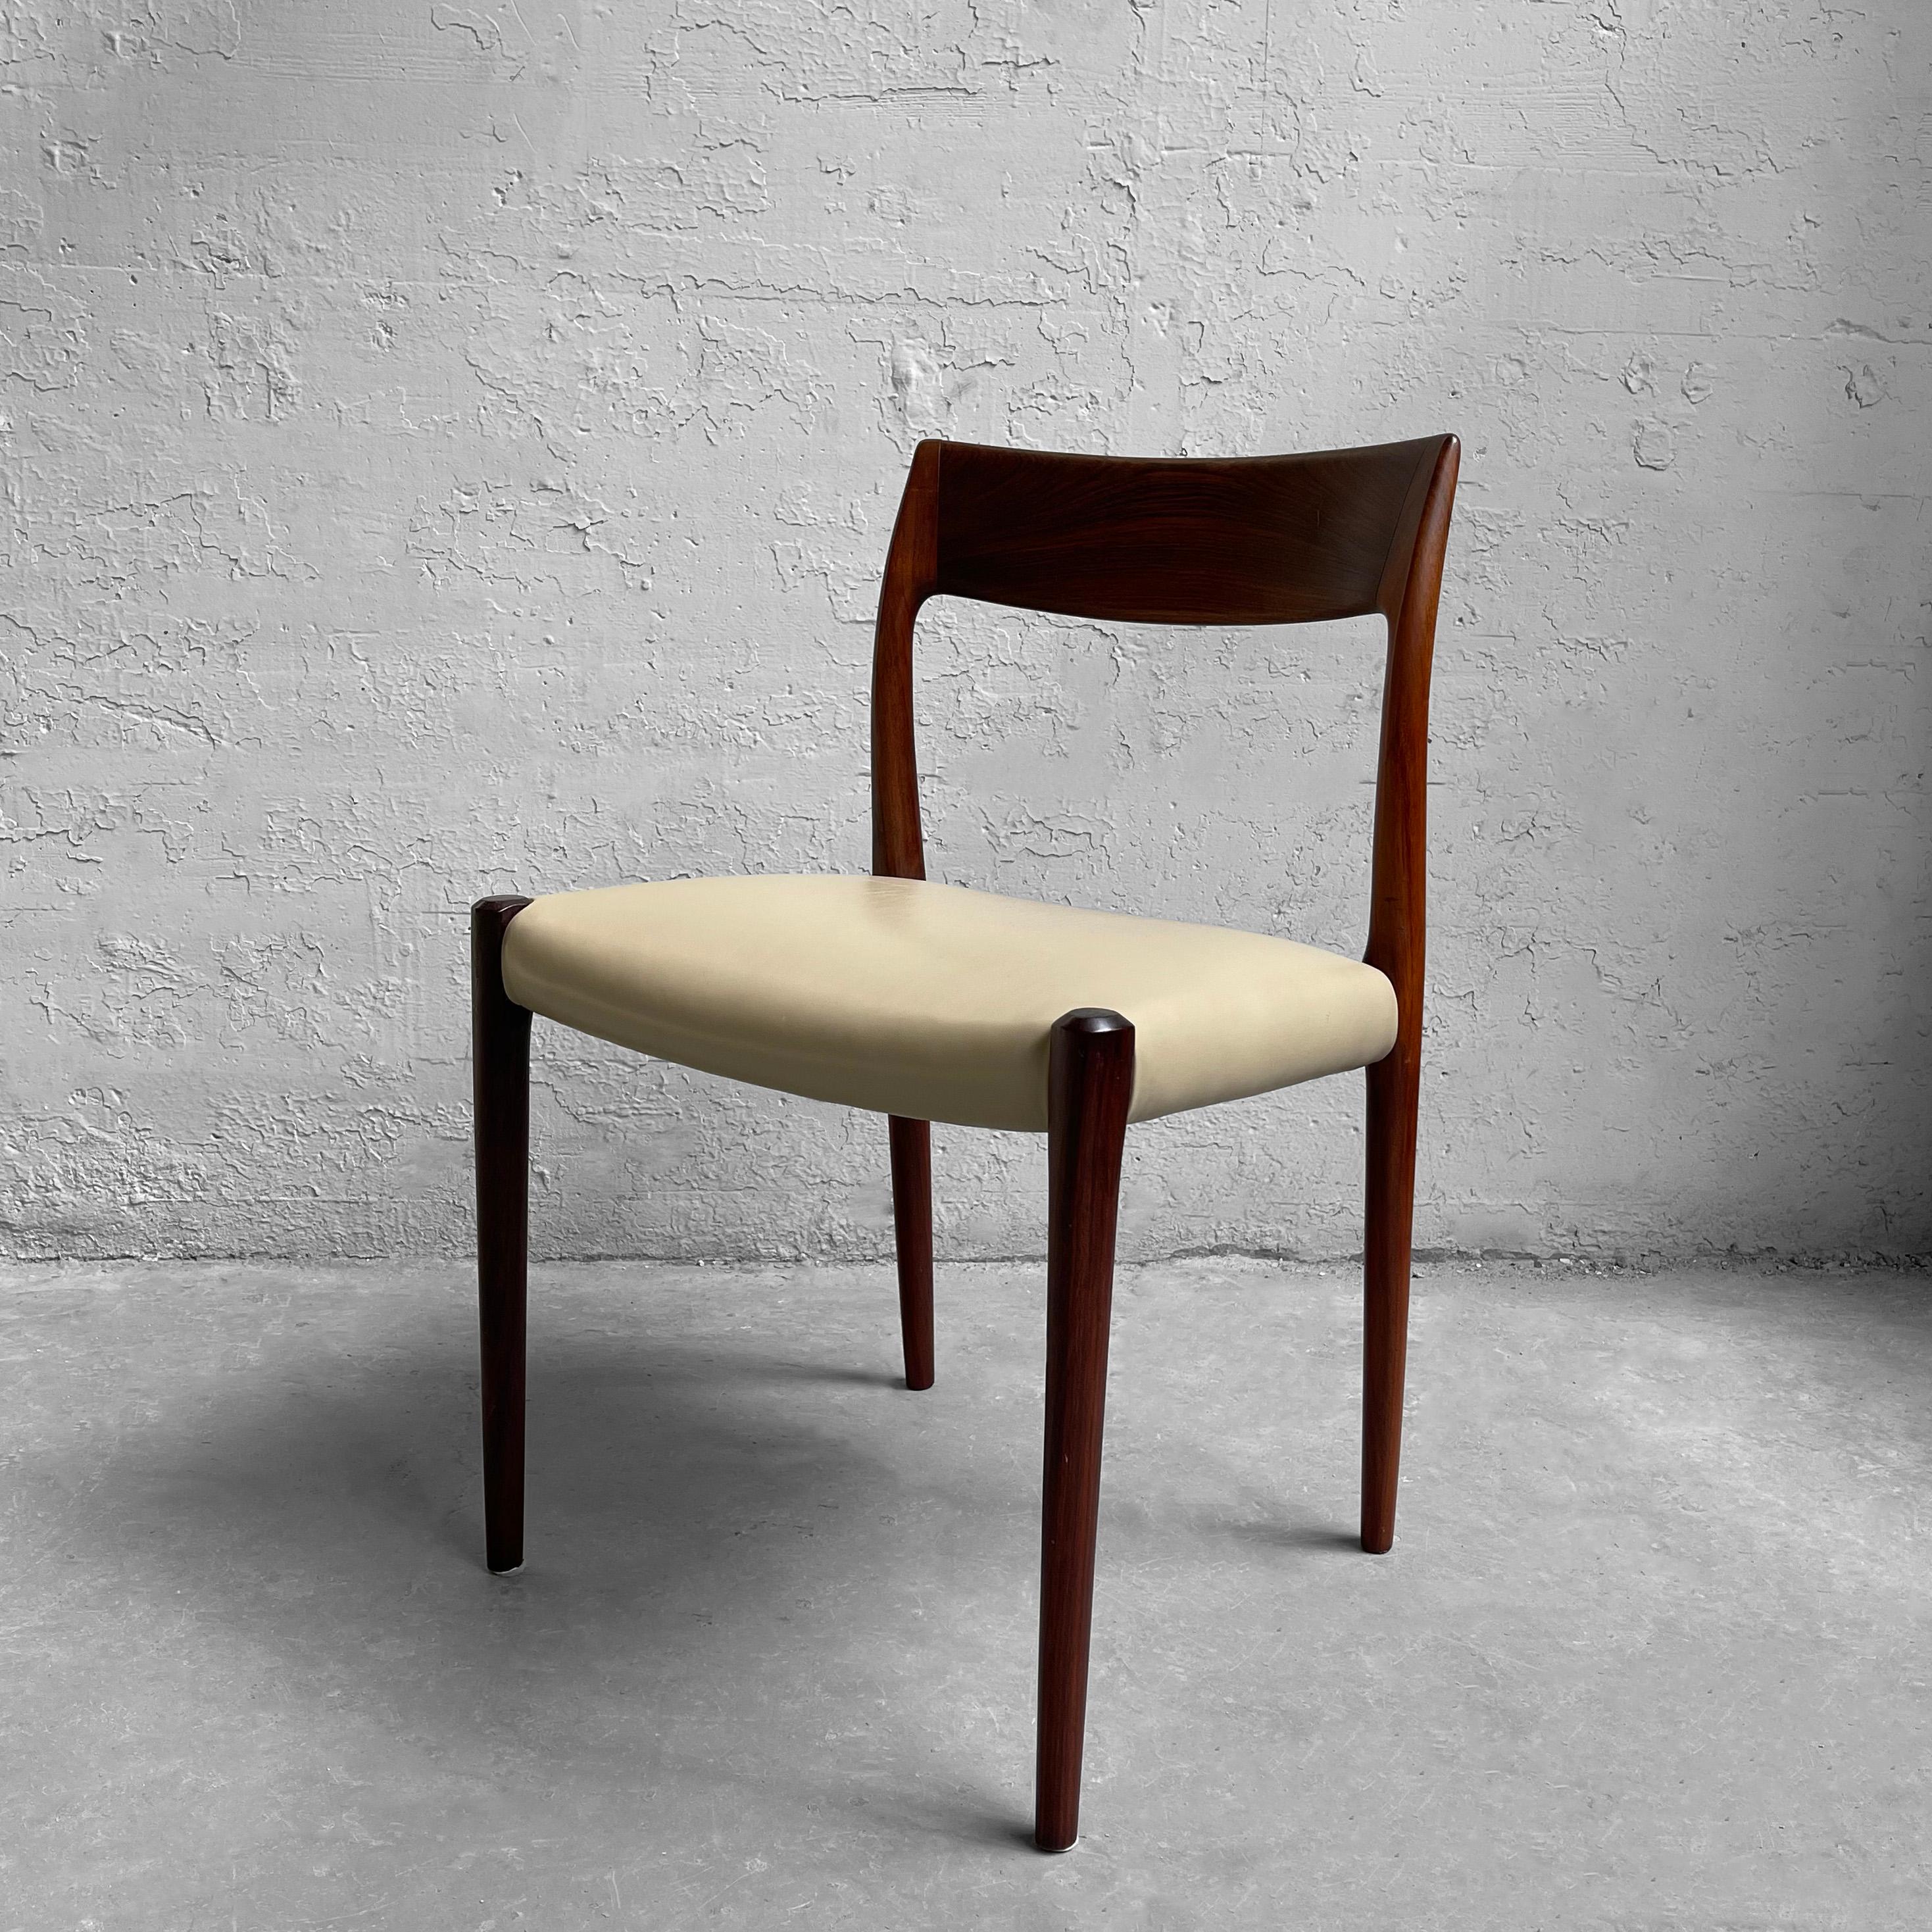 Scandinavian modern, dining or side chair by Niels Moller for J.L. Moller features a rosewood frame with newly upholstered cream leather seat. This Classic Danish modern chair also works as a great desk chair.